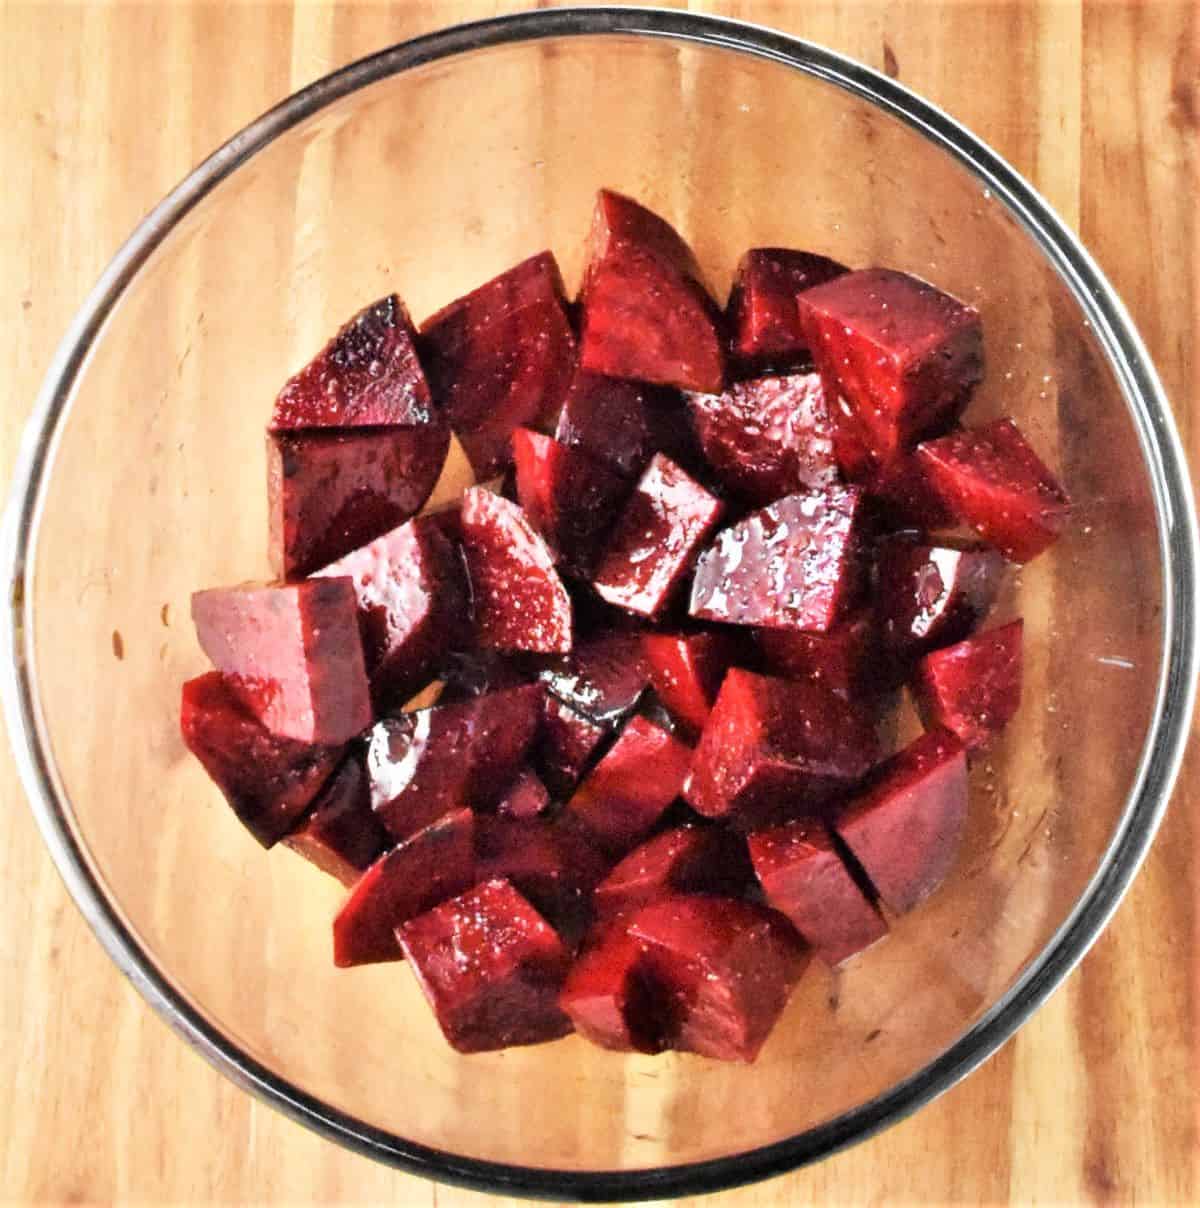 Top down view of beetroot pieces with oil in bowl.